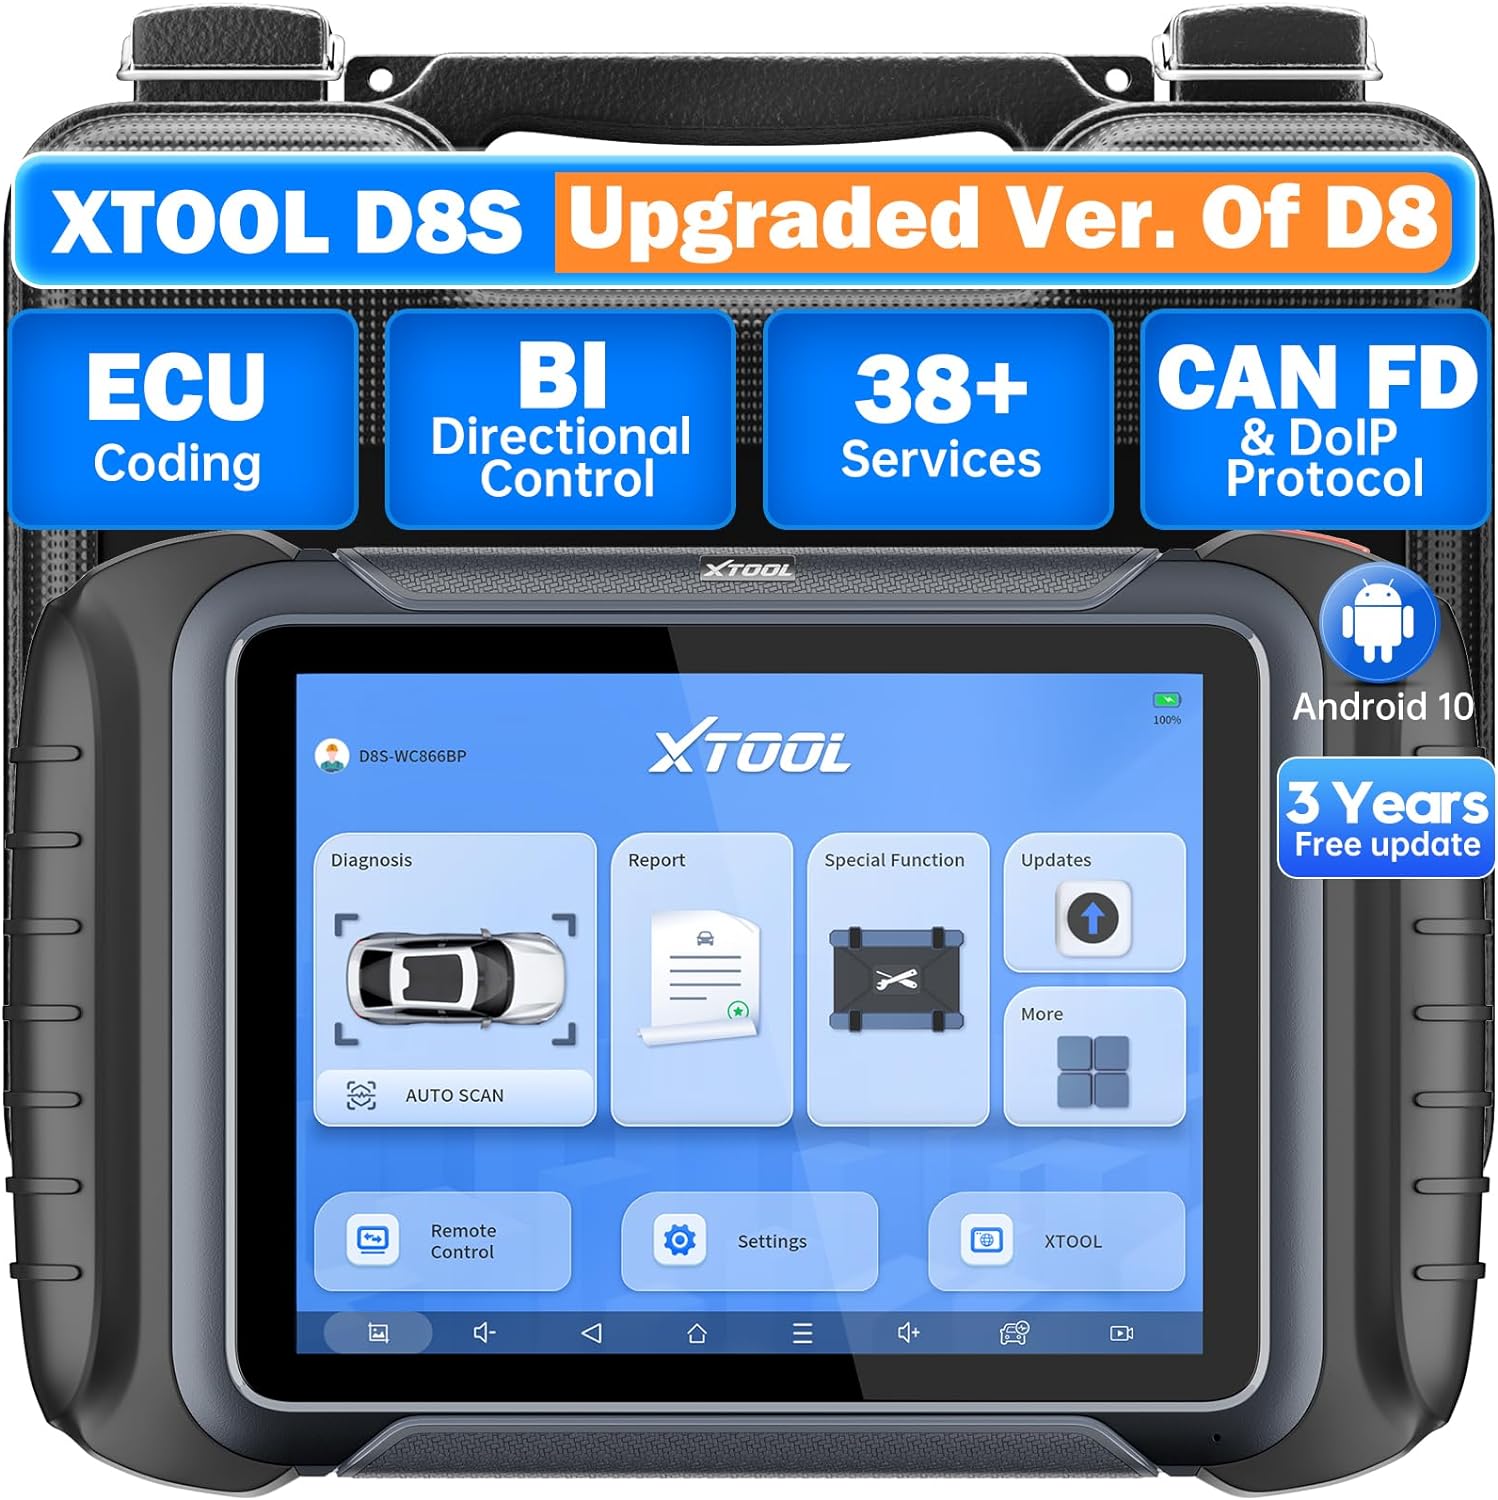 2024 Newest XTOOL D8S Bi-Directional Diagnostic Scan Tool CAN FD & DoIP, ECU Coding, Topology, Key Programming, Full Diagnostics, Upgraded Version of D8